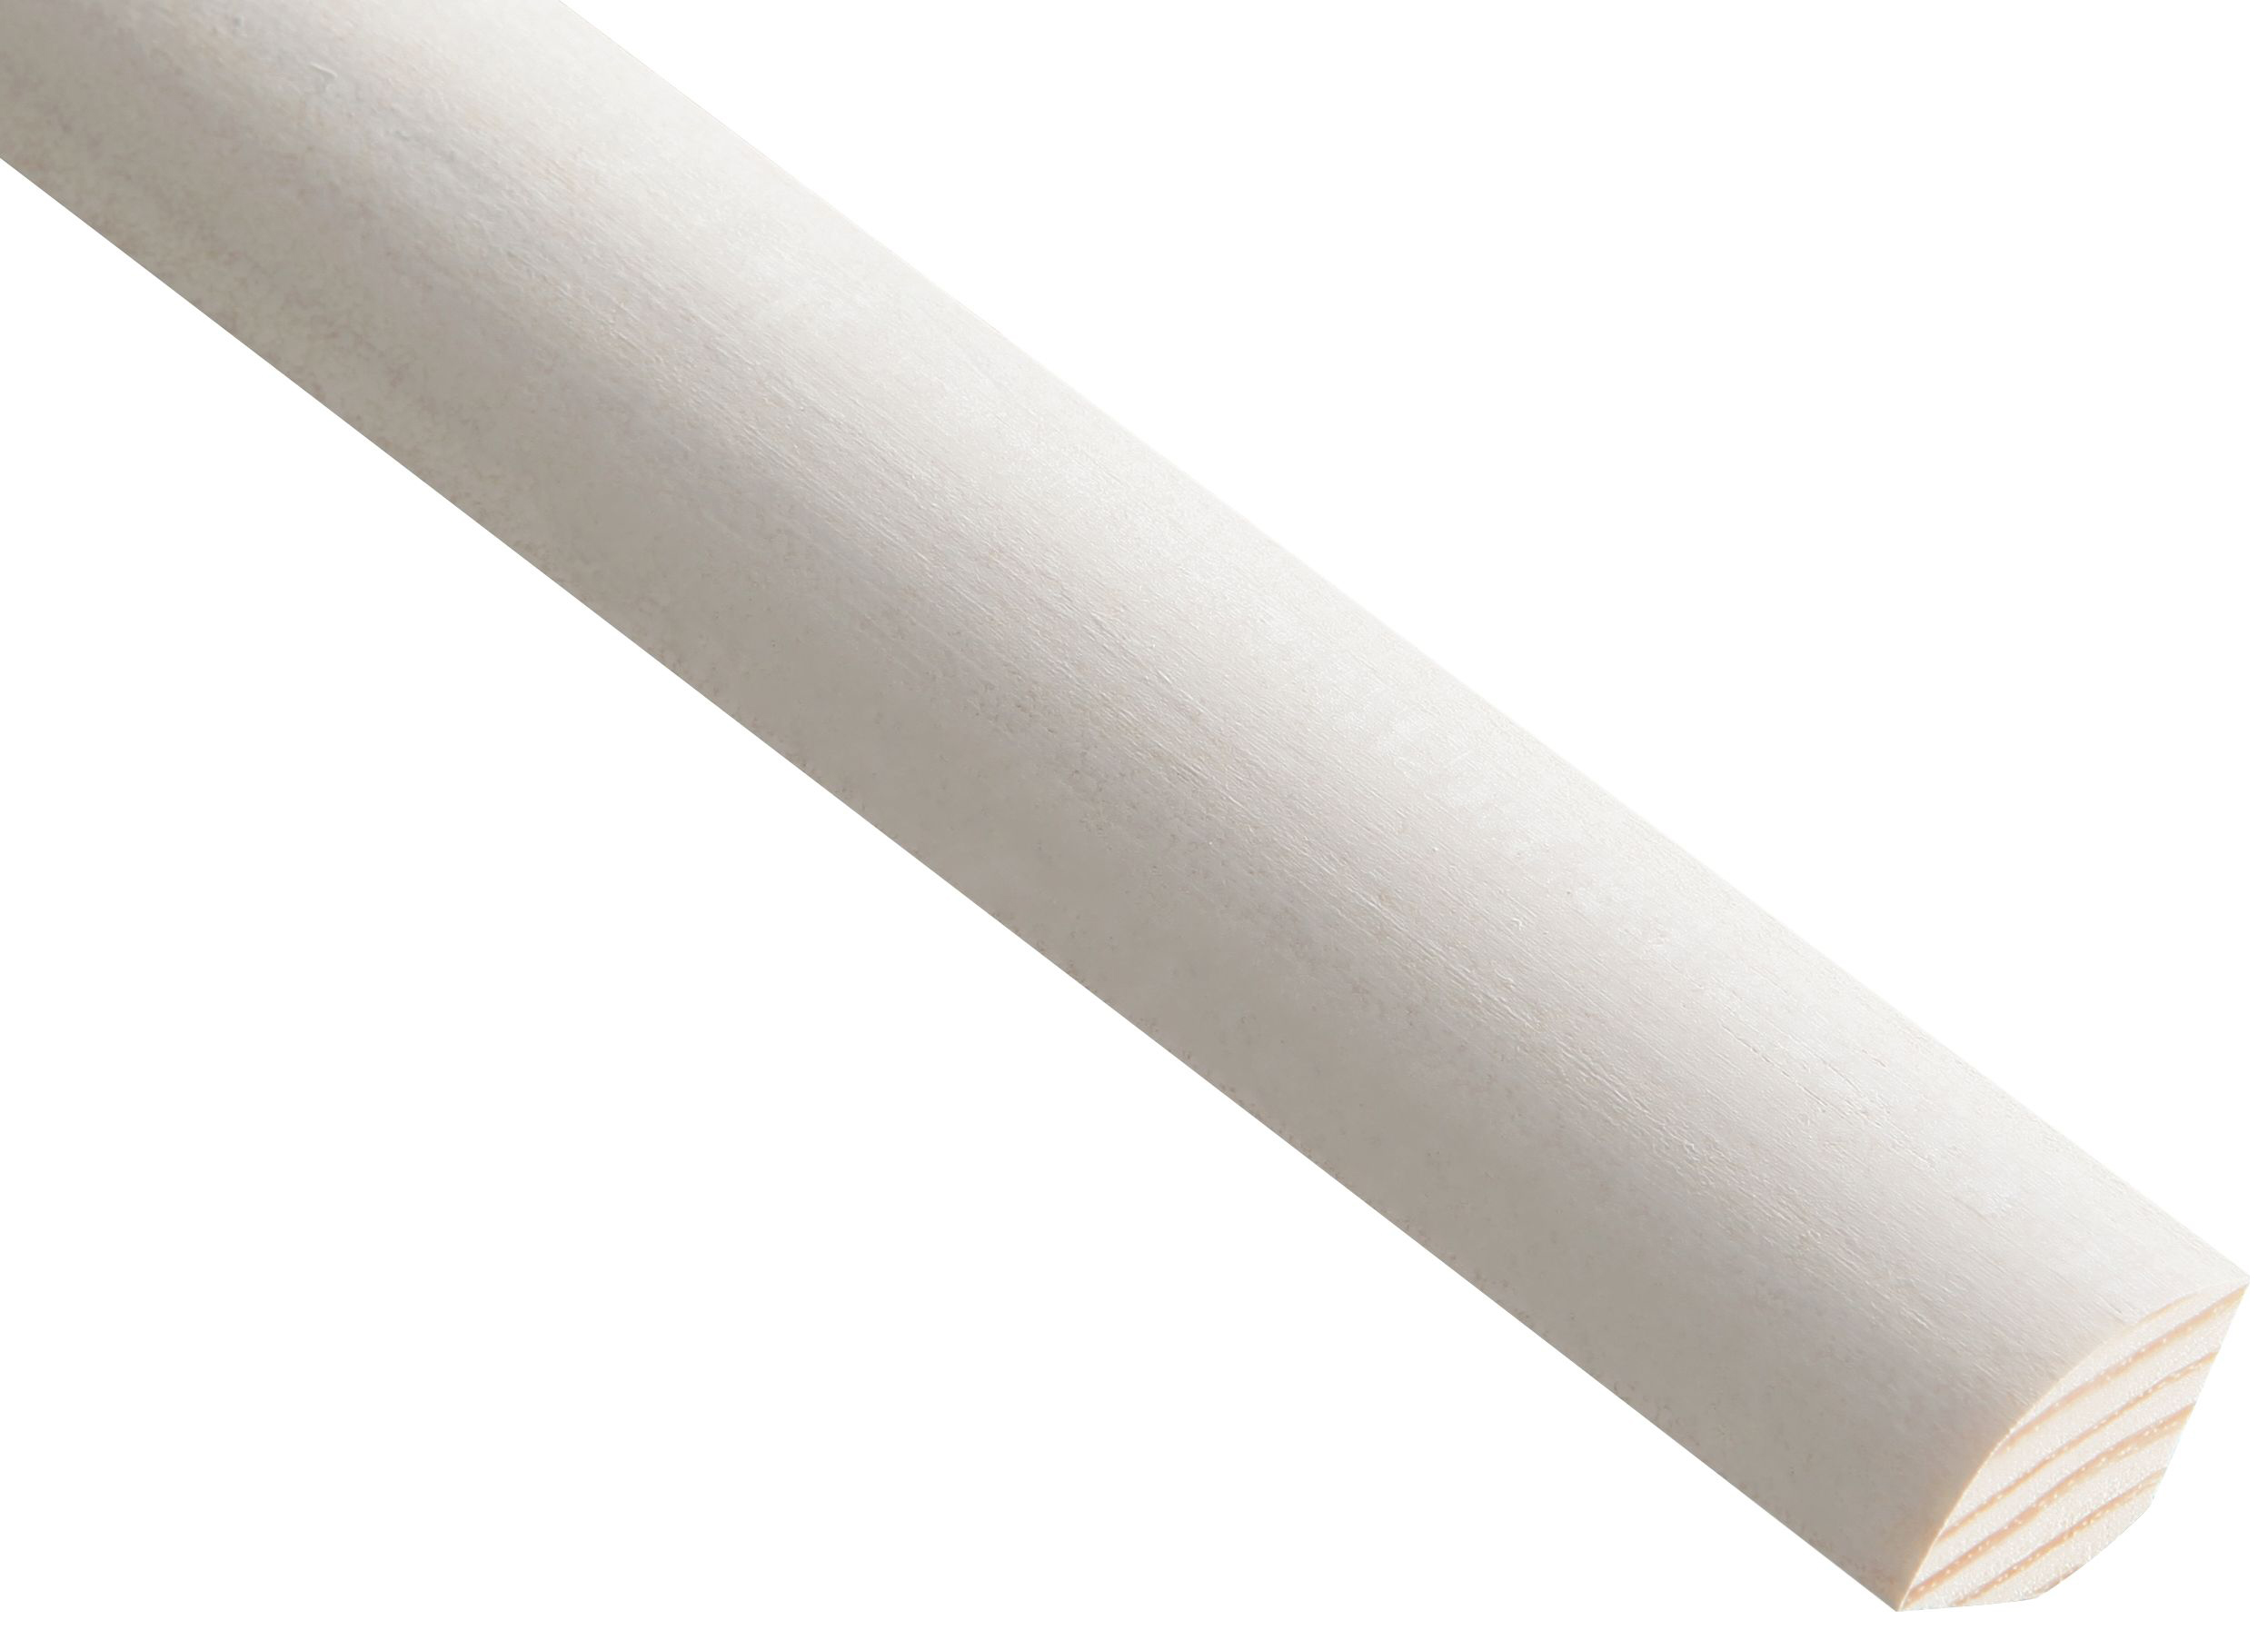 Image of Wickes Primed Quadrant Moulding - 18 x 18 x 2400mm